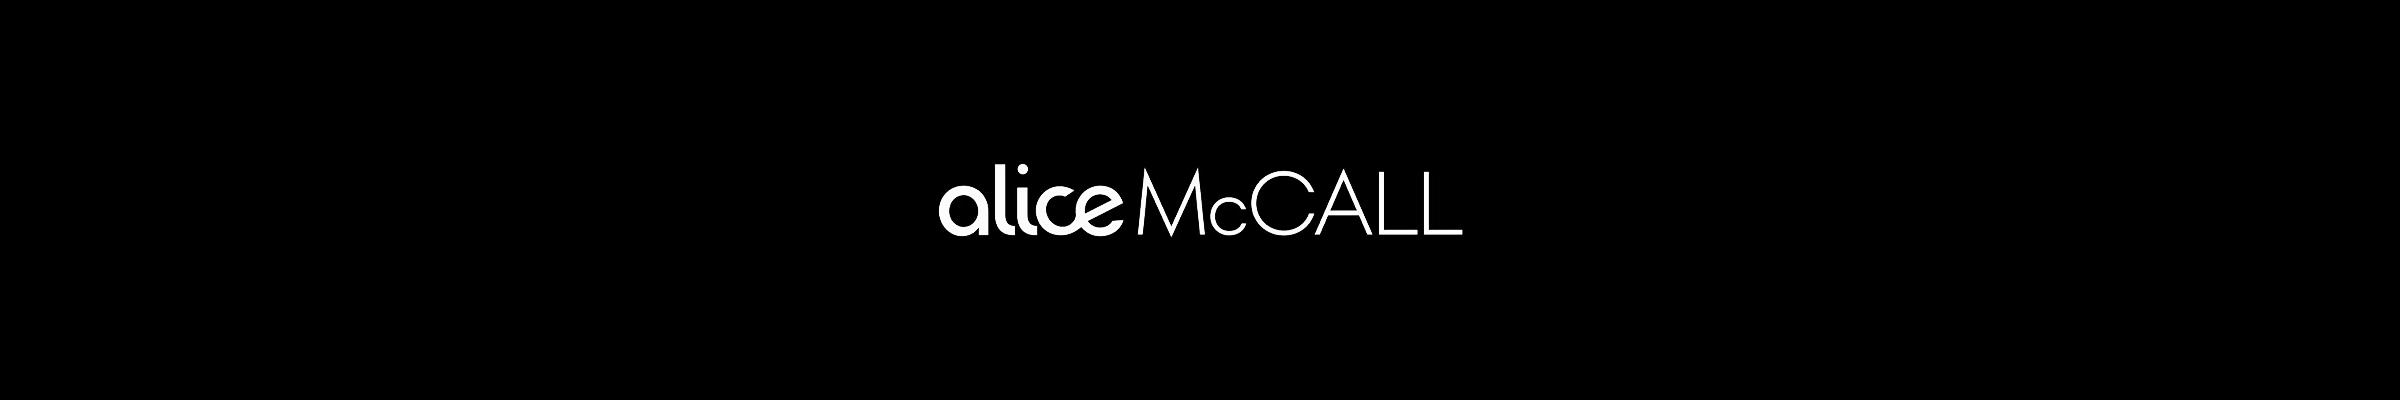 alice-mccall-banner